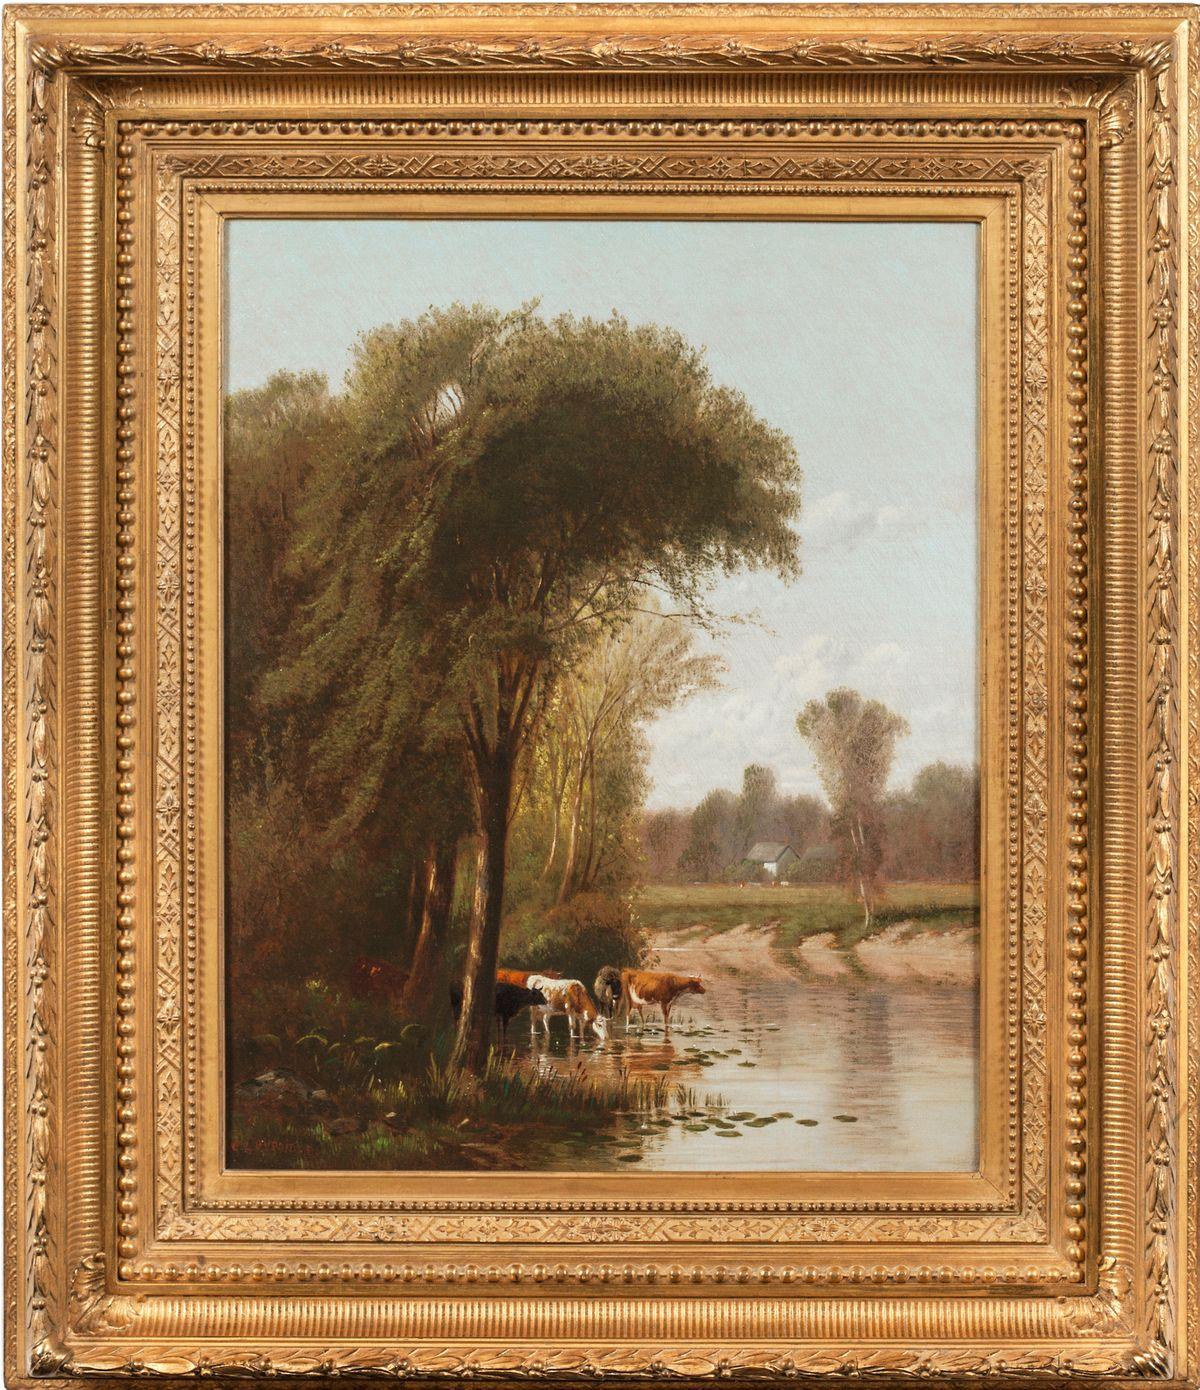 Idyllic Landscape with Cows by Clinton Loveridge (1824-1915, American) For Sale 1